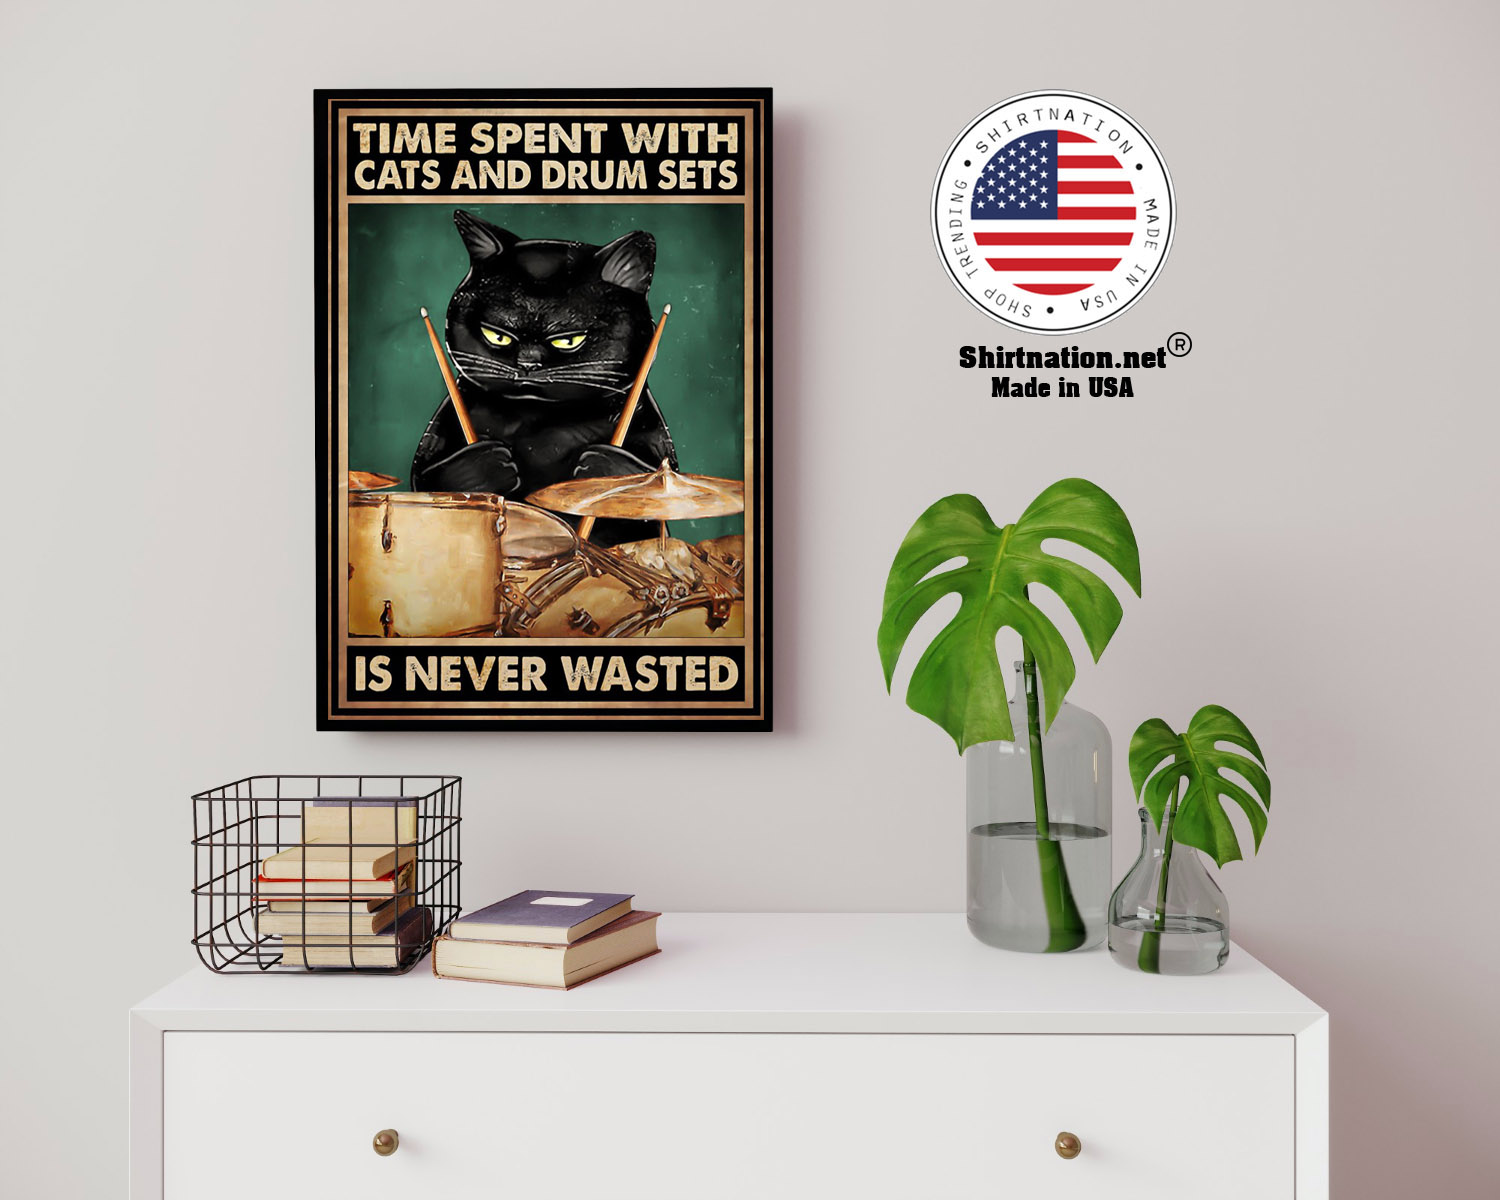 Time spent with cats and drum sets is never wasted poster 18